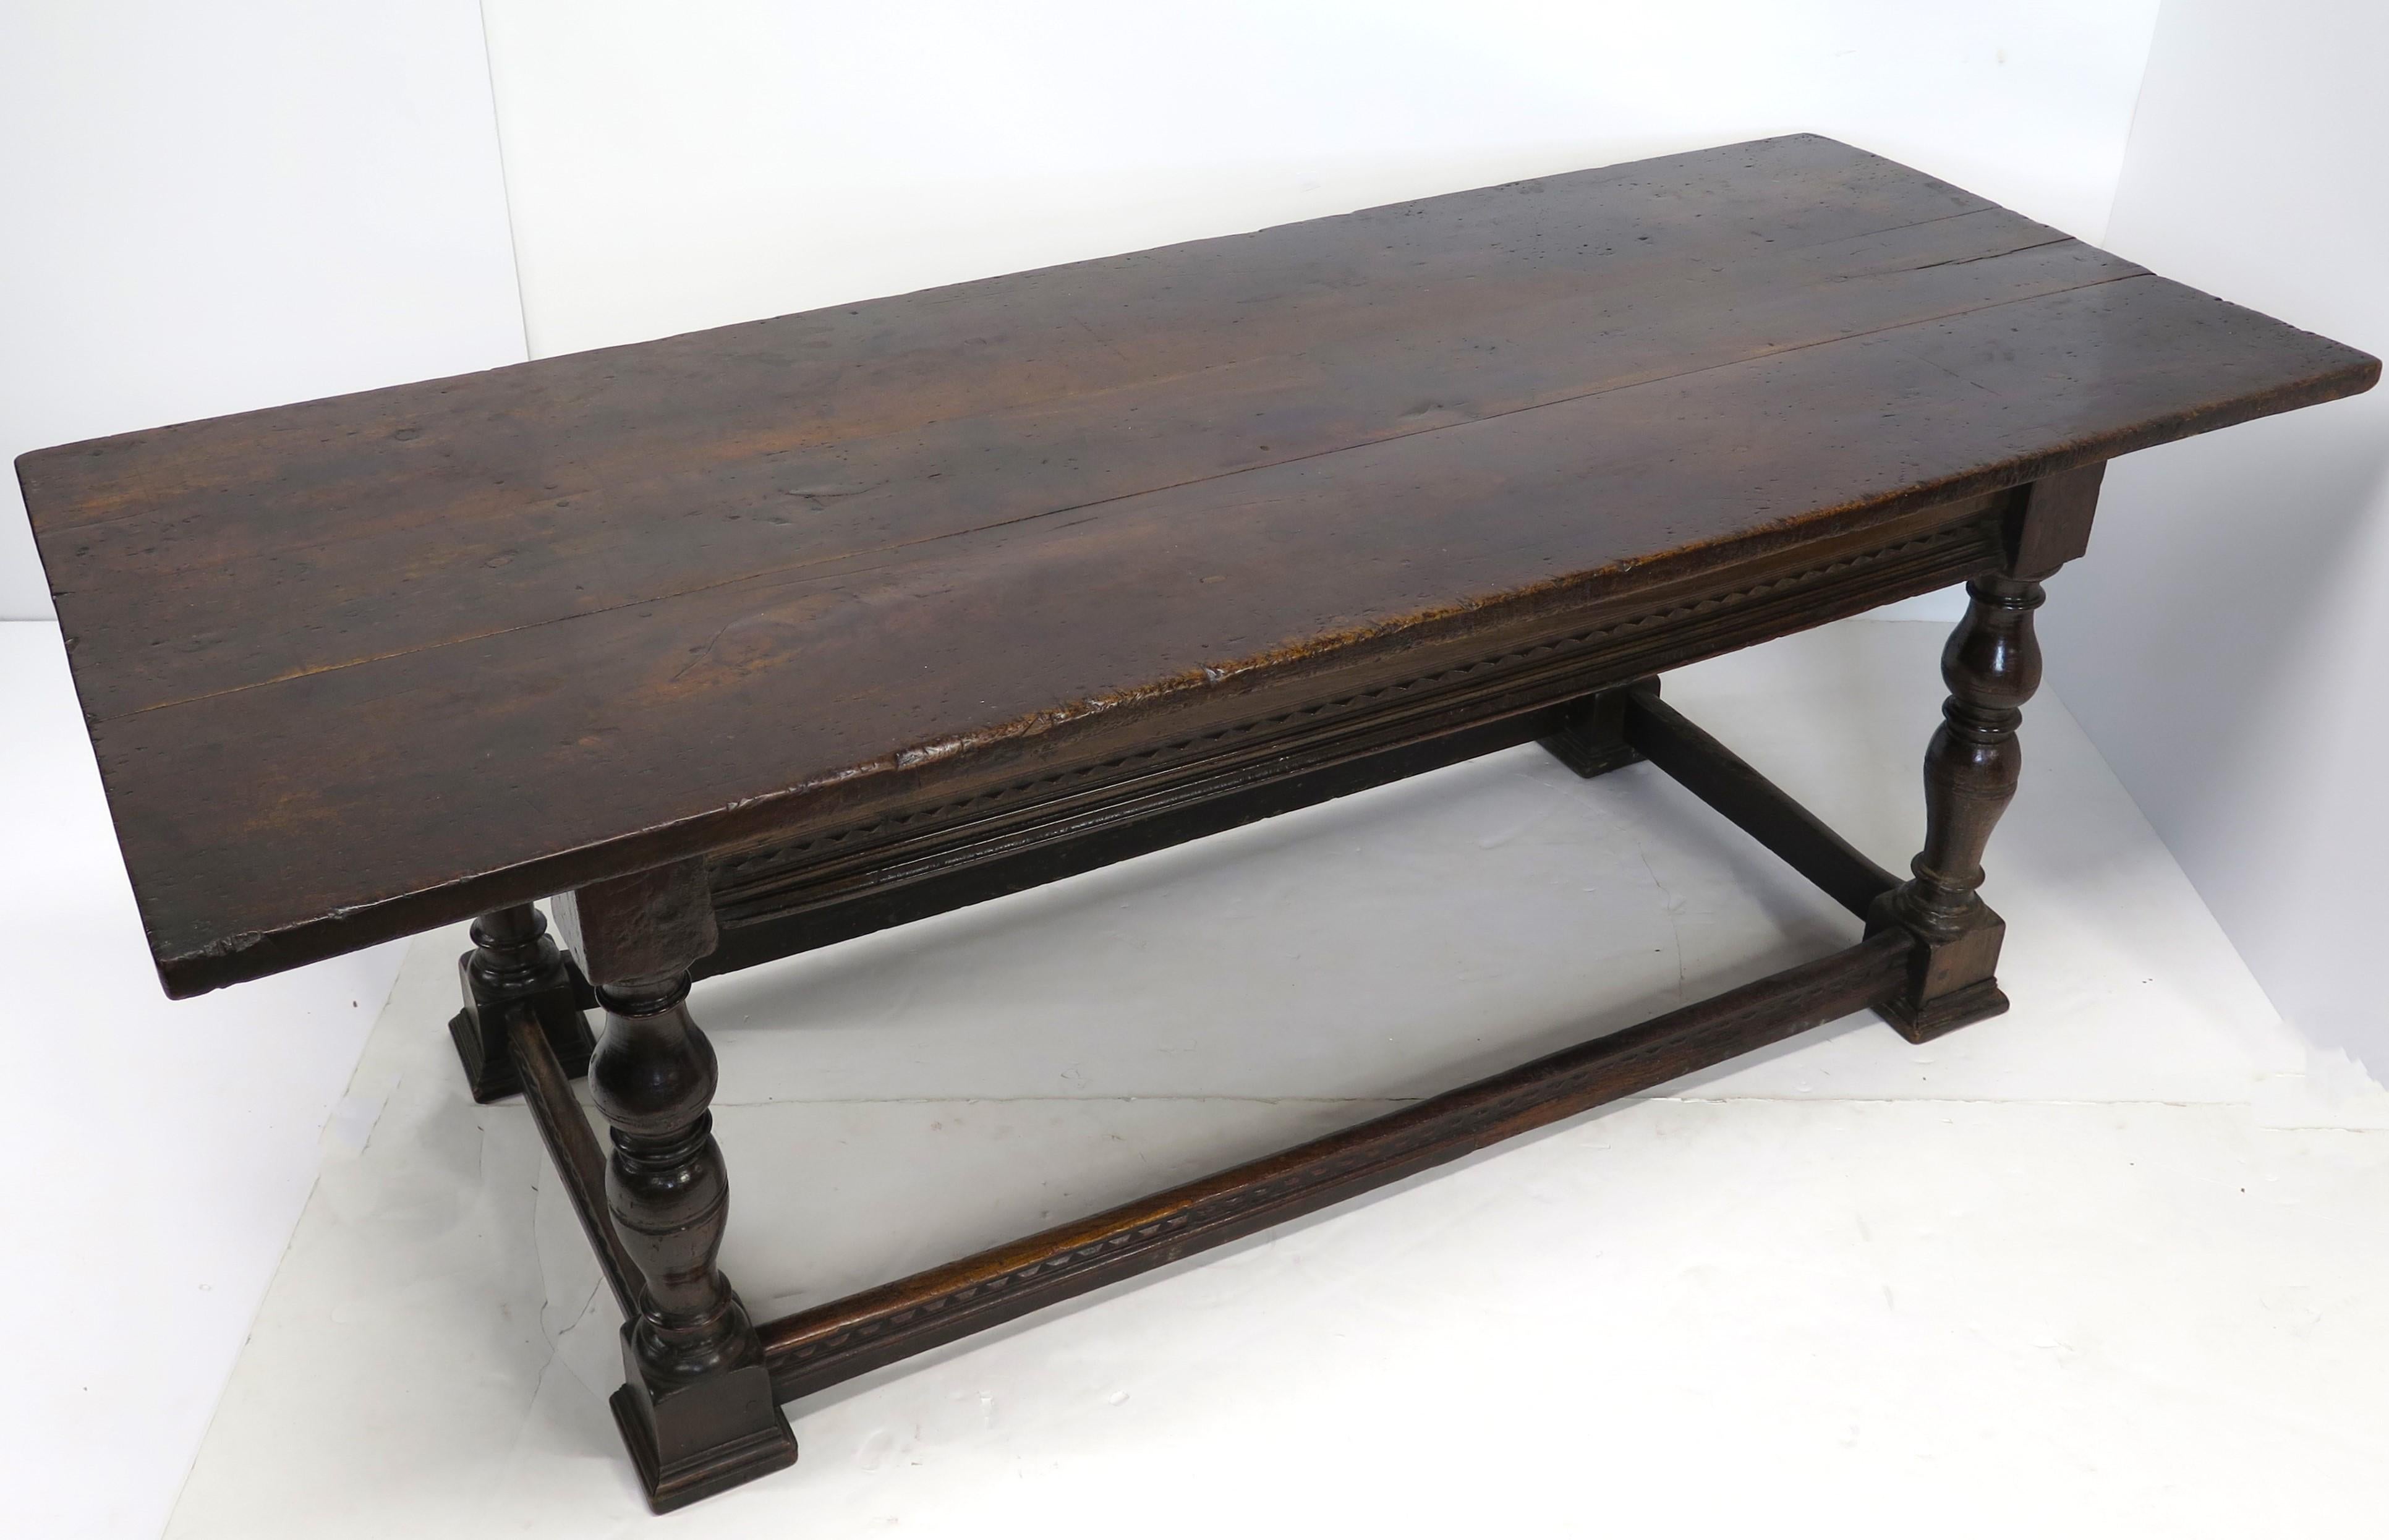 Baroque Late 17th-Early 18th Century English Oak Refectory Table For Sale